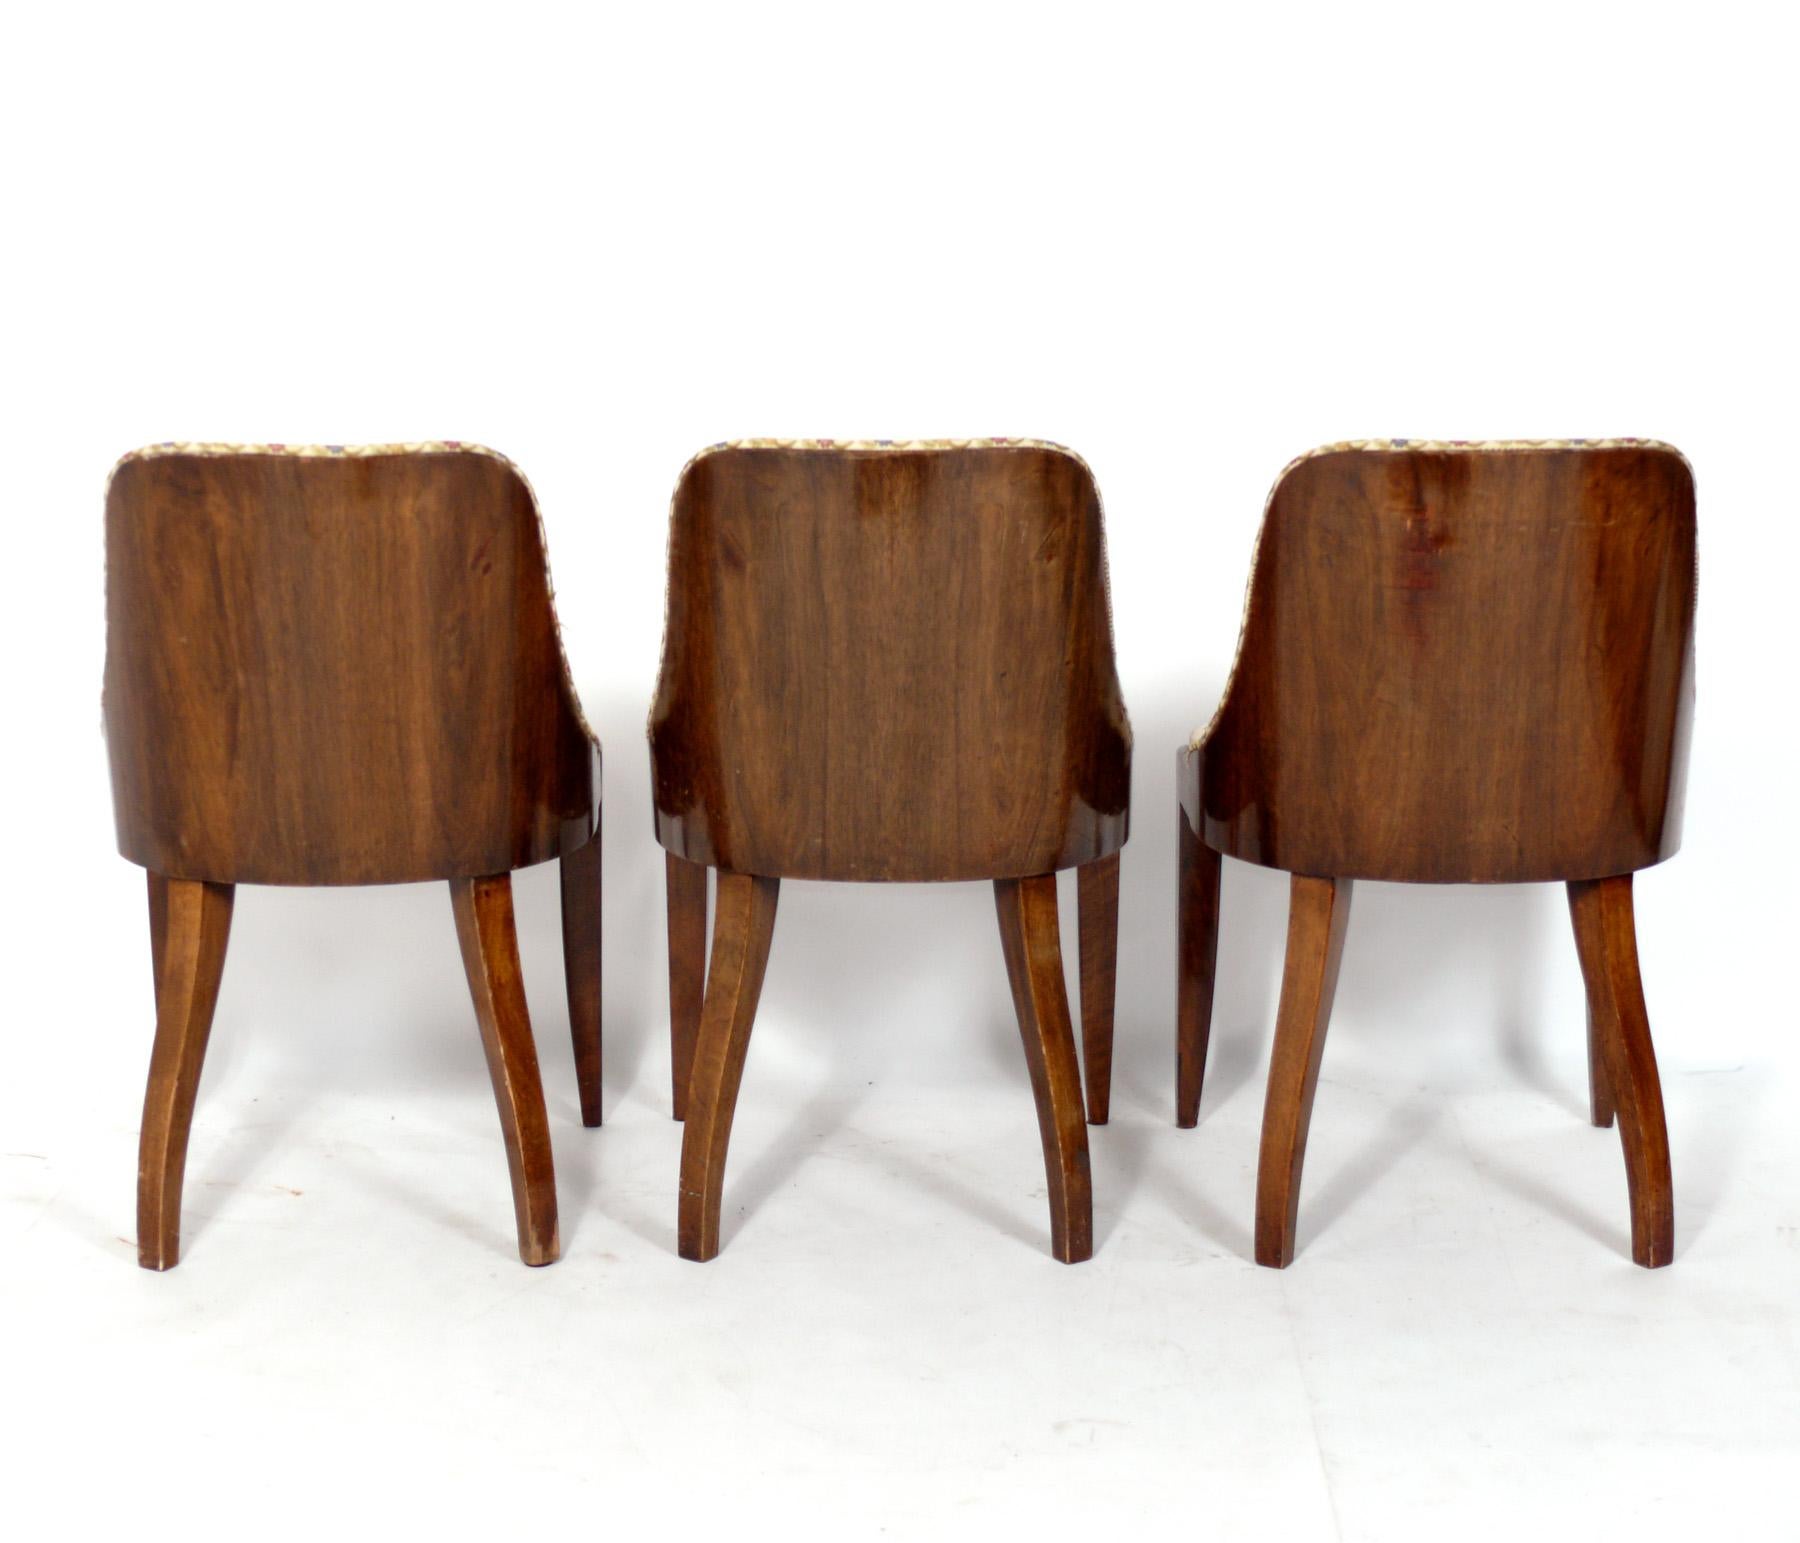 Mid-20th Century French Art Deco Dining Chairs Refinished Reupholstered